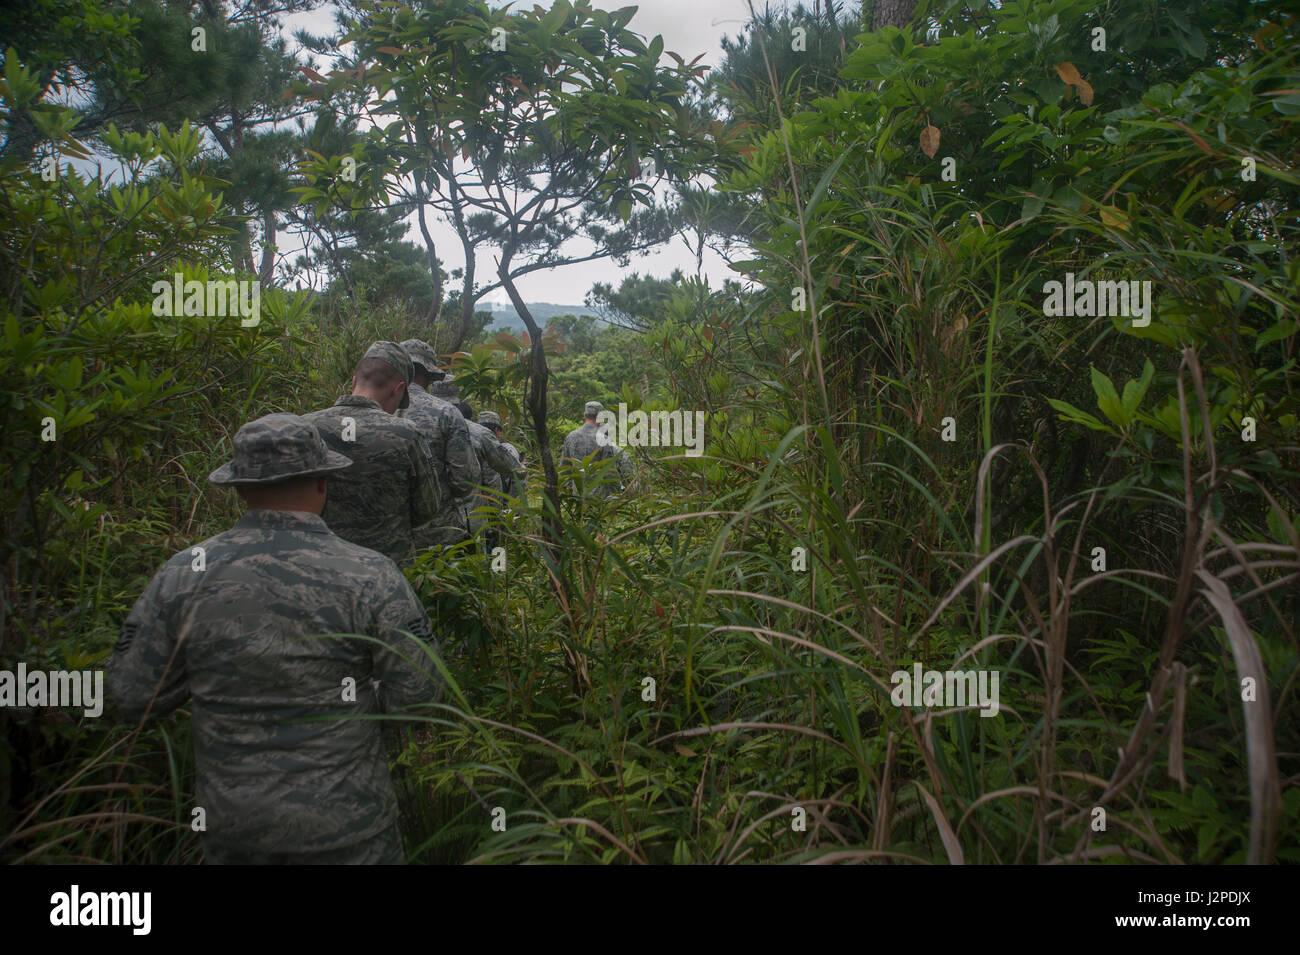 U.S. Air Force Airmen assigned to the 18th Medical Group navigate a jungle as part of the Preventative Aerospace Medicine Convention April 21, 2017, at Kadena Air Base, Japan. Correctly and safely navigating potentially dangerous terrain was one of the focal points of the PAMACON. (U.S. Air Force photo by Airman 1st Class Quay Drawdy) Stock Photo